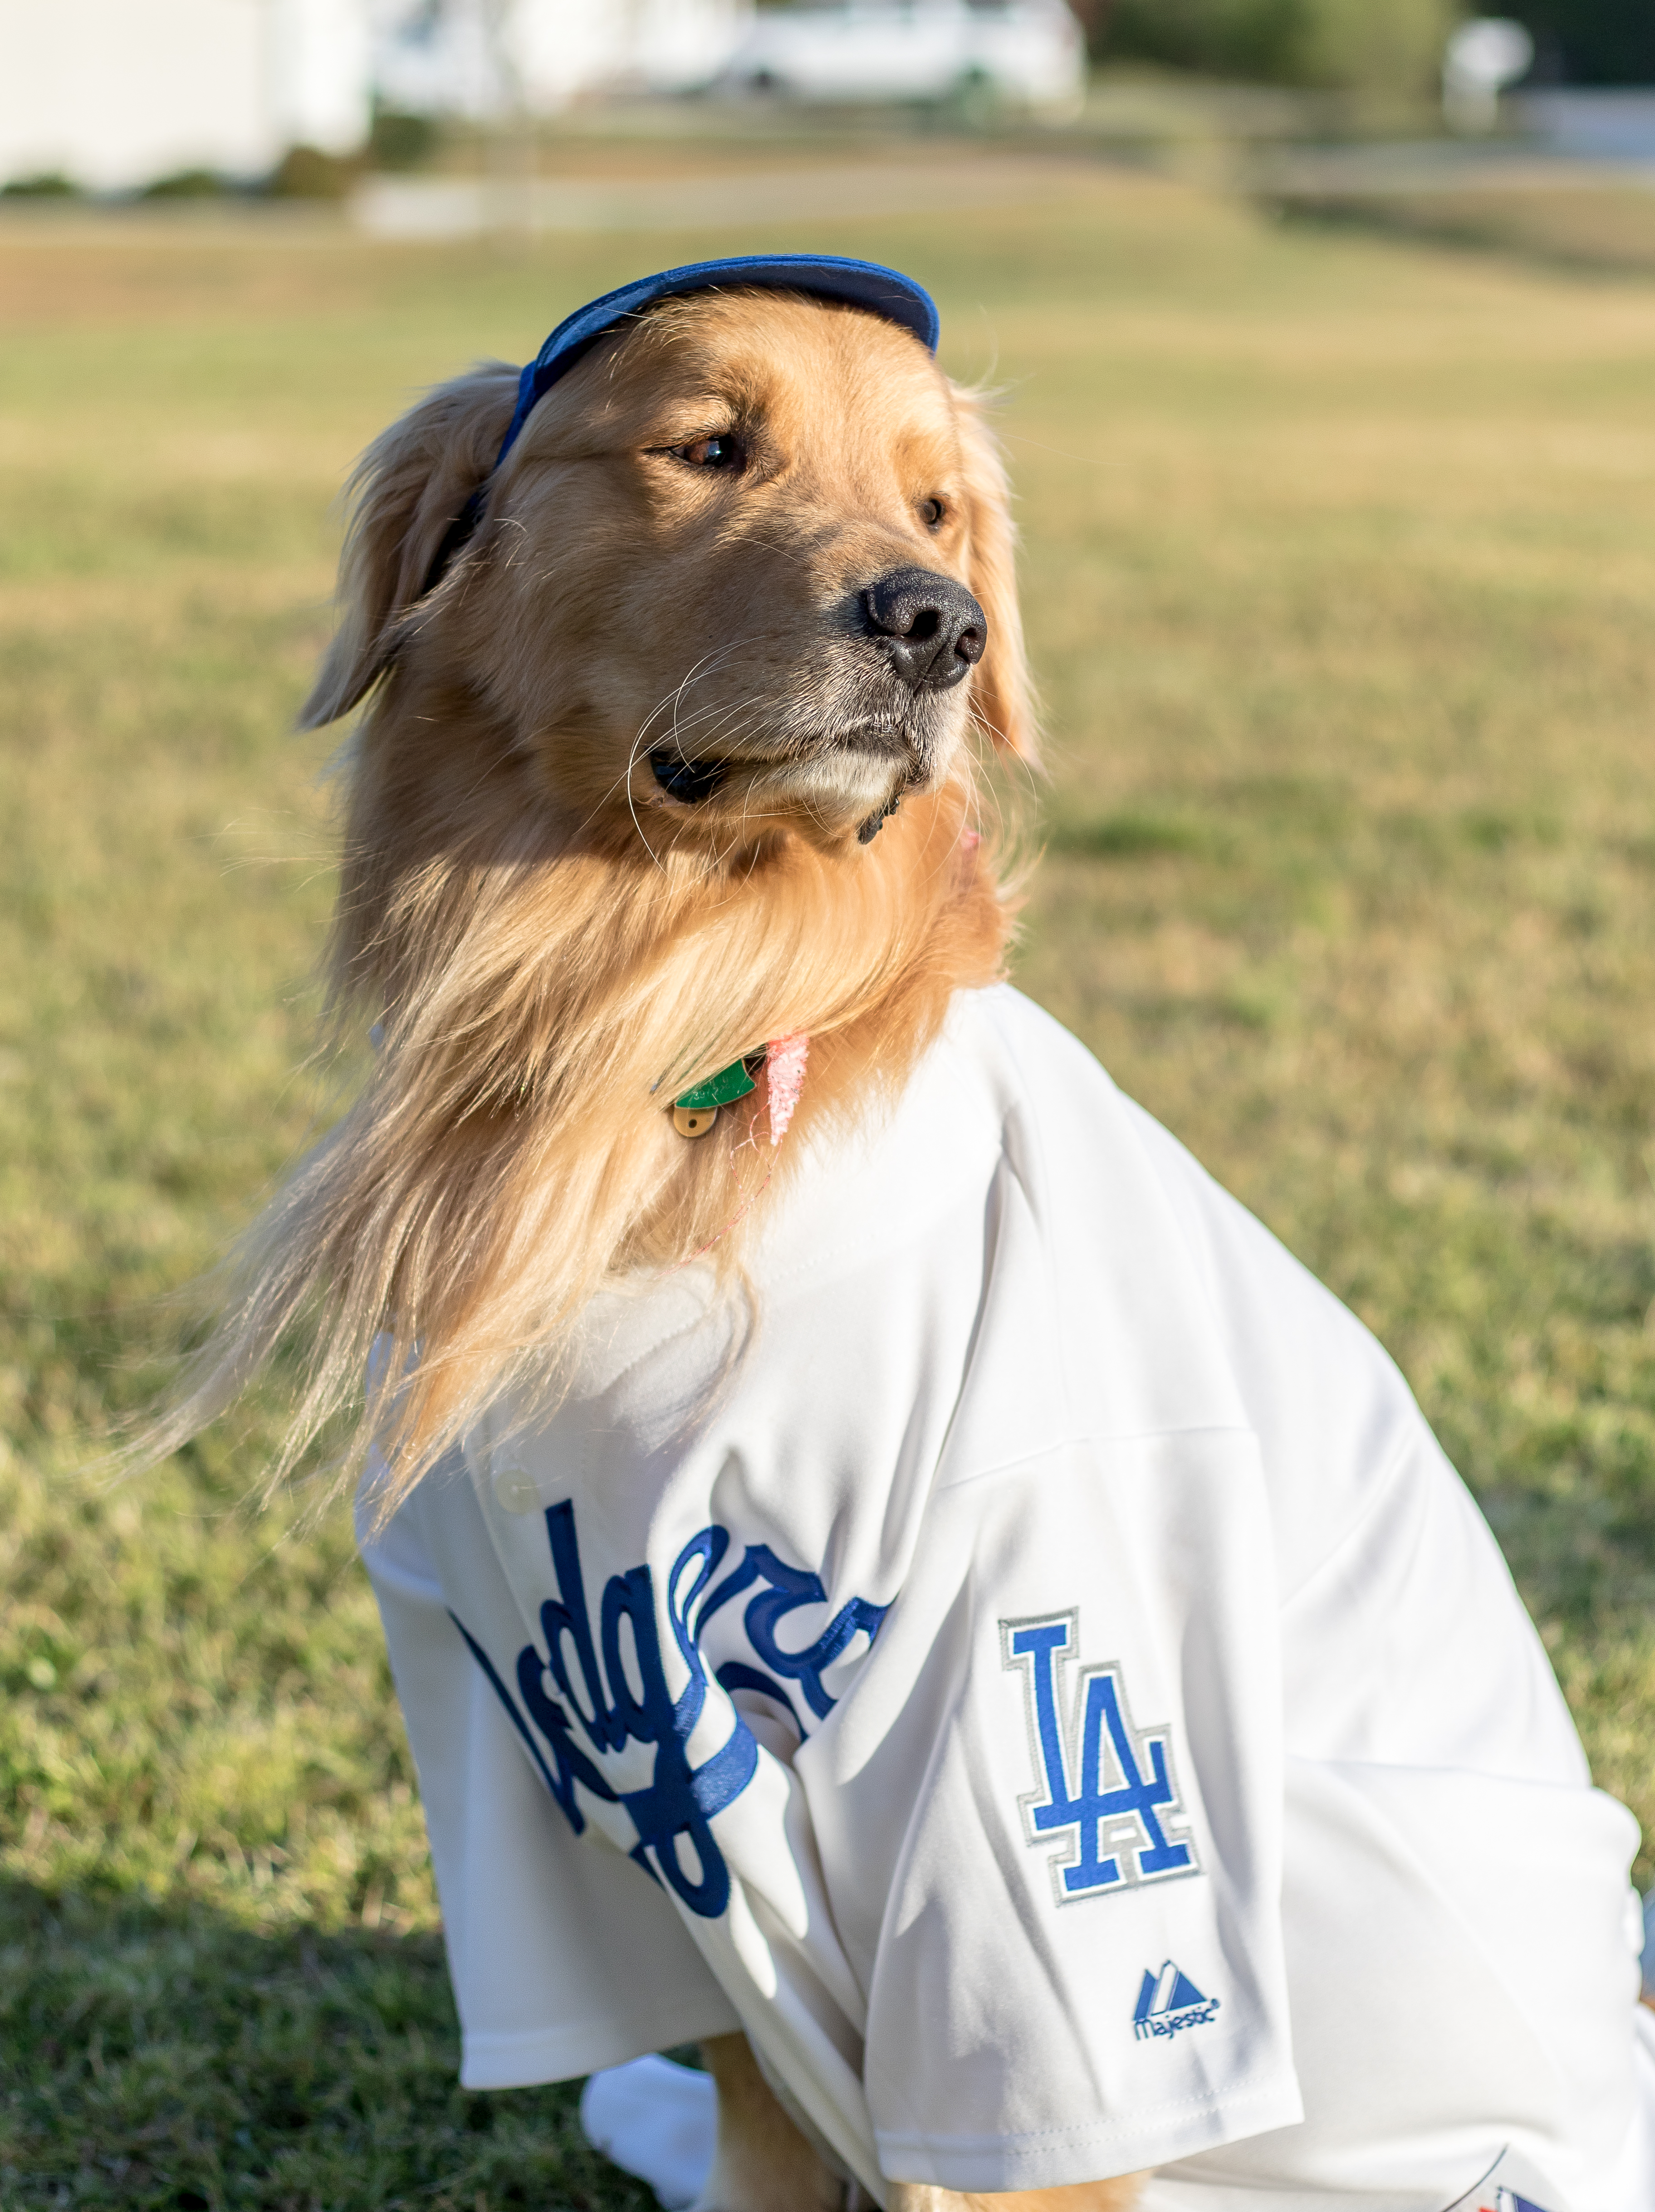 Buy dodgers pet gear - OFF-54% > Free Delivery